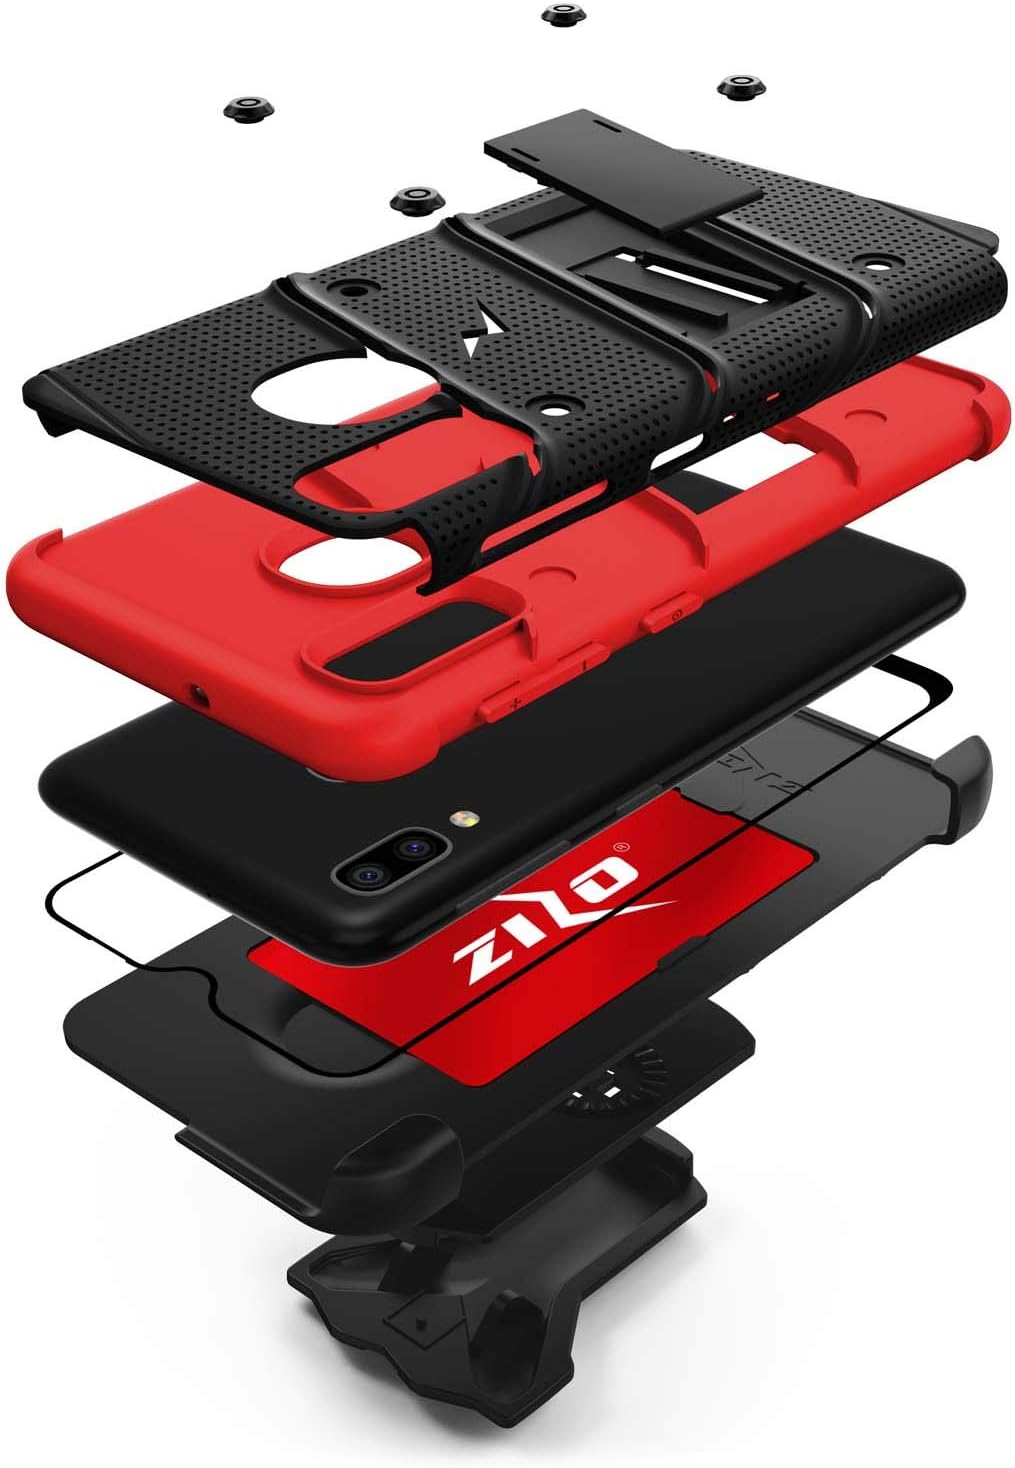 ZIZO Bolt Galaxy A20 - Holster Case, Built-in Kickstand, Tempered Glass & Lanyard (3 Colors)